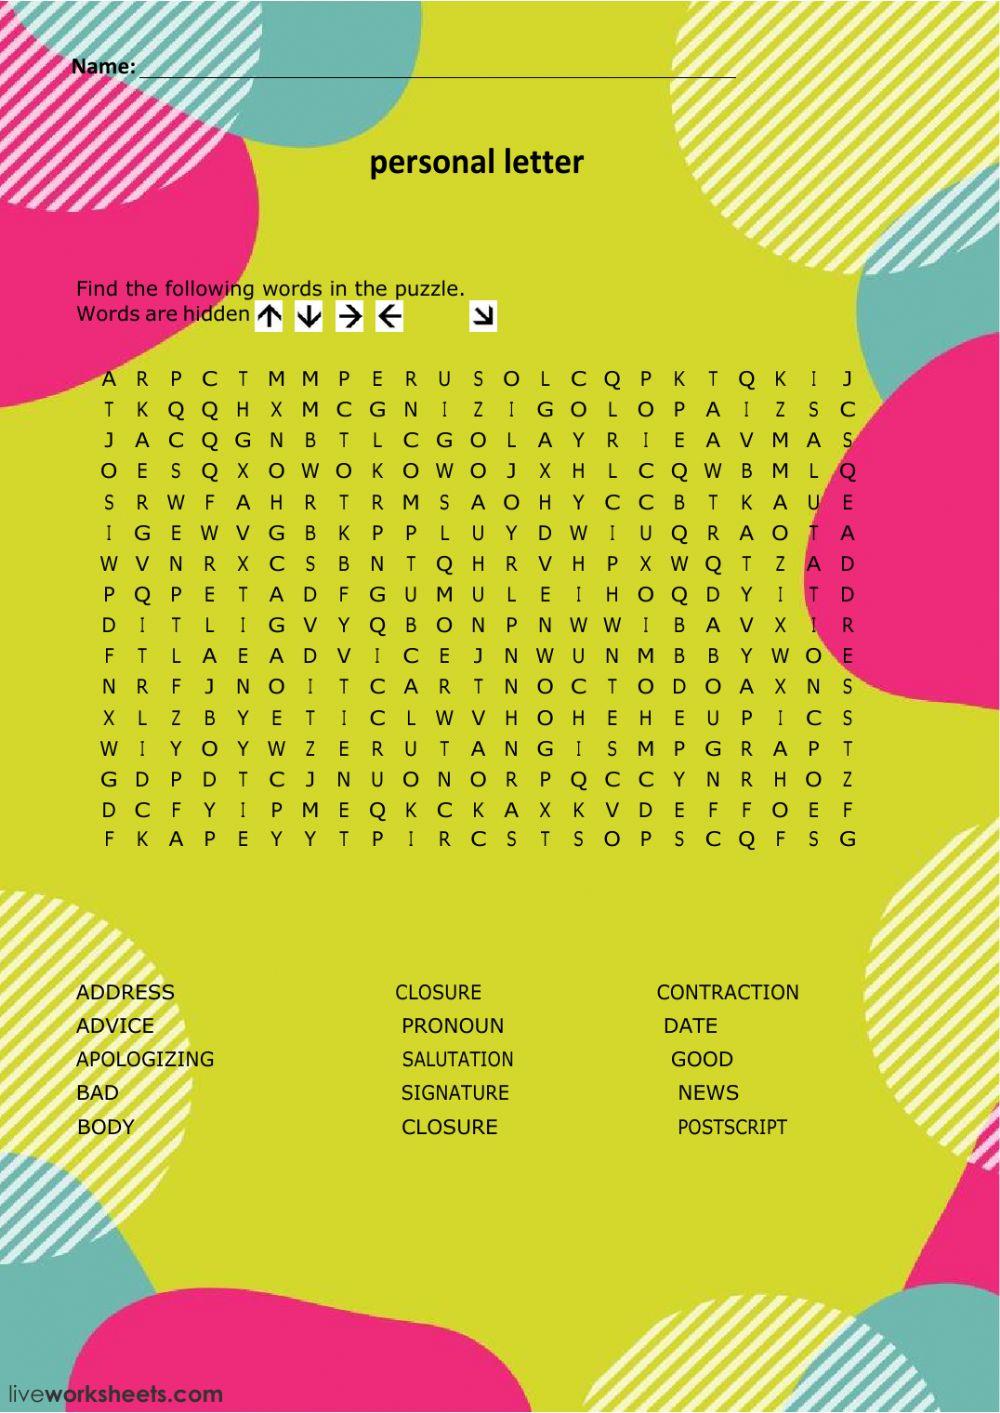 Wordsearch personal letter